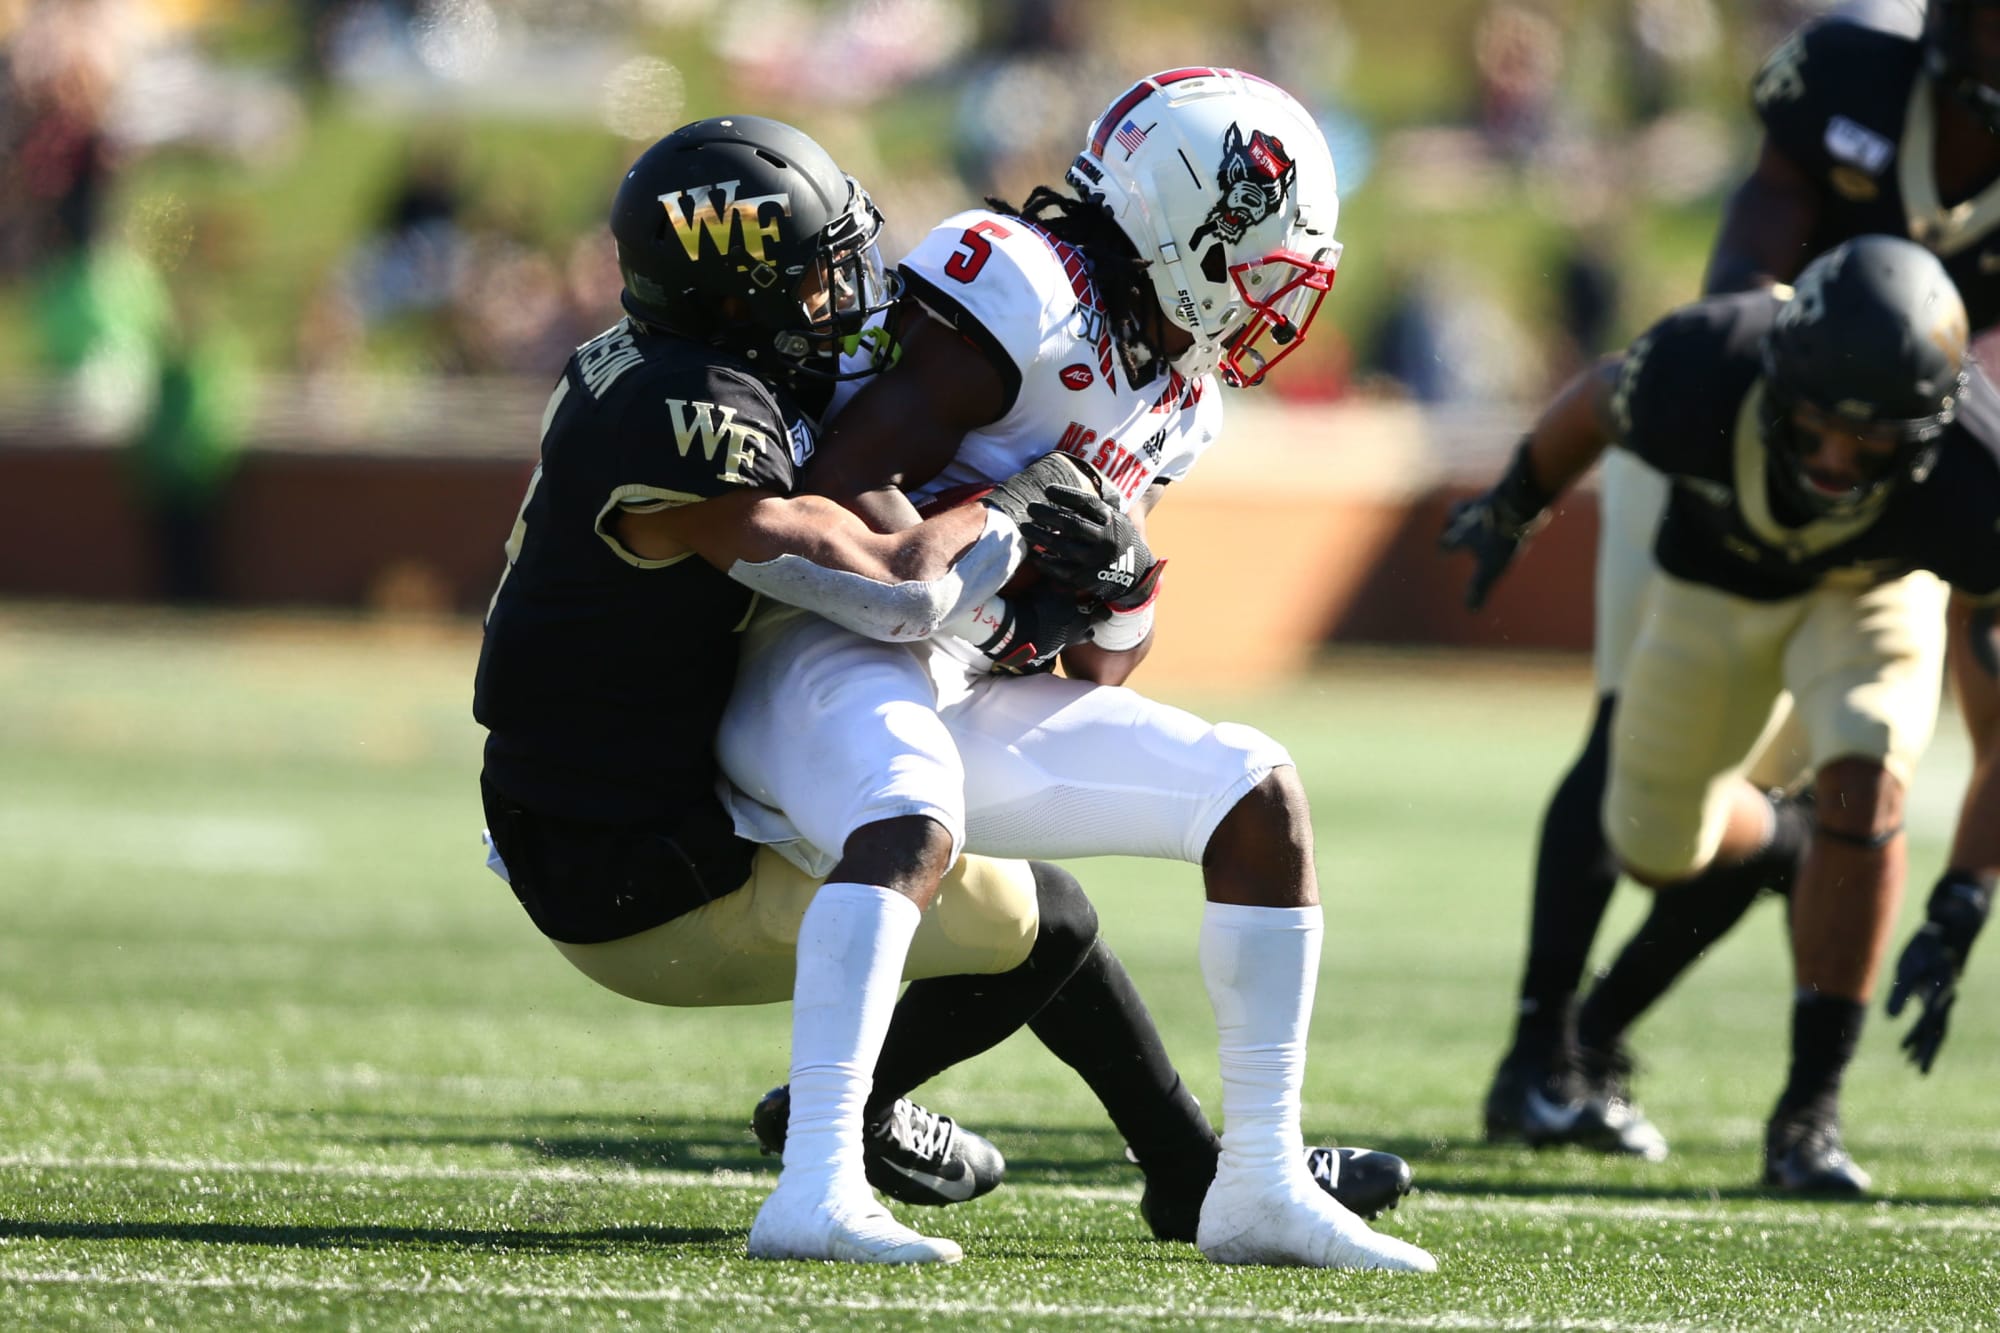 Wake Forest Football Bowl projection for Demon Deacons in 2021